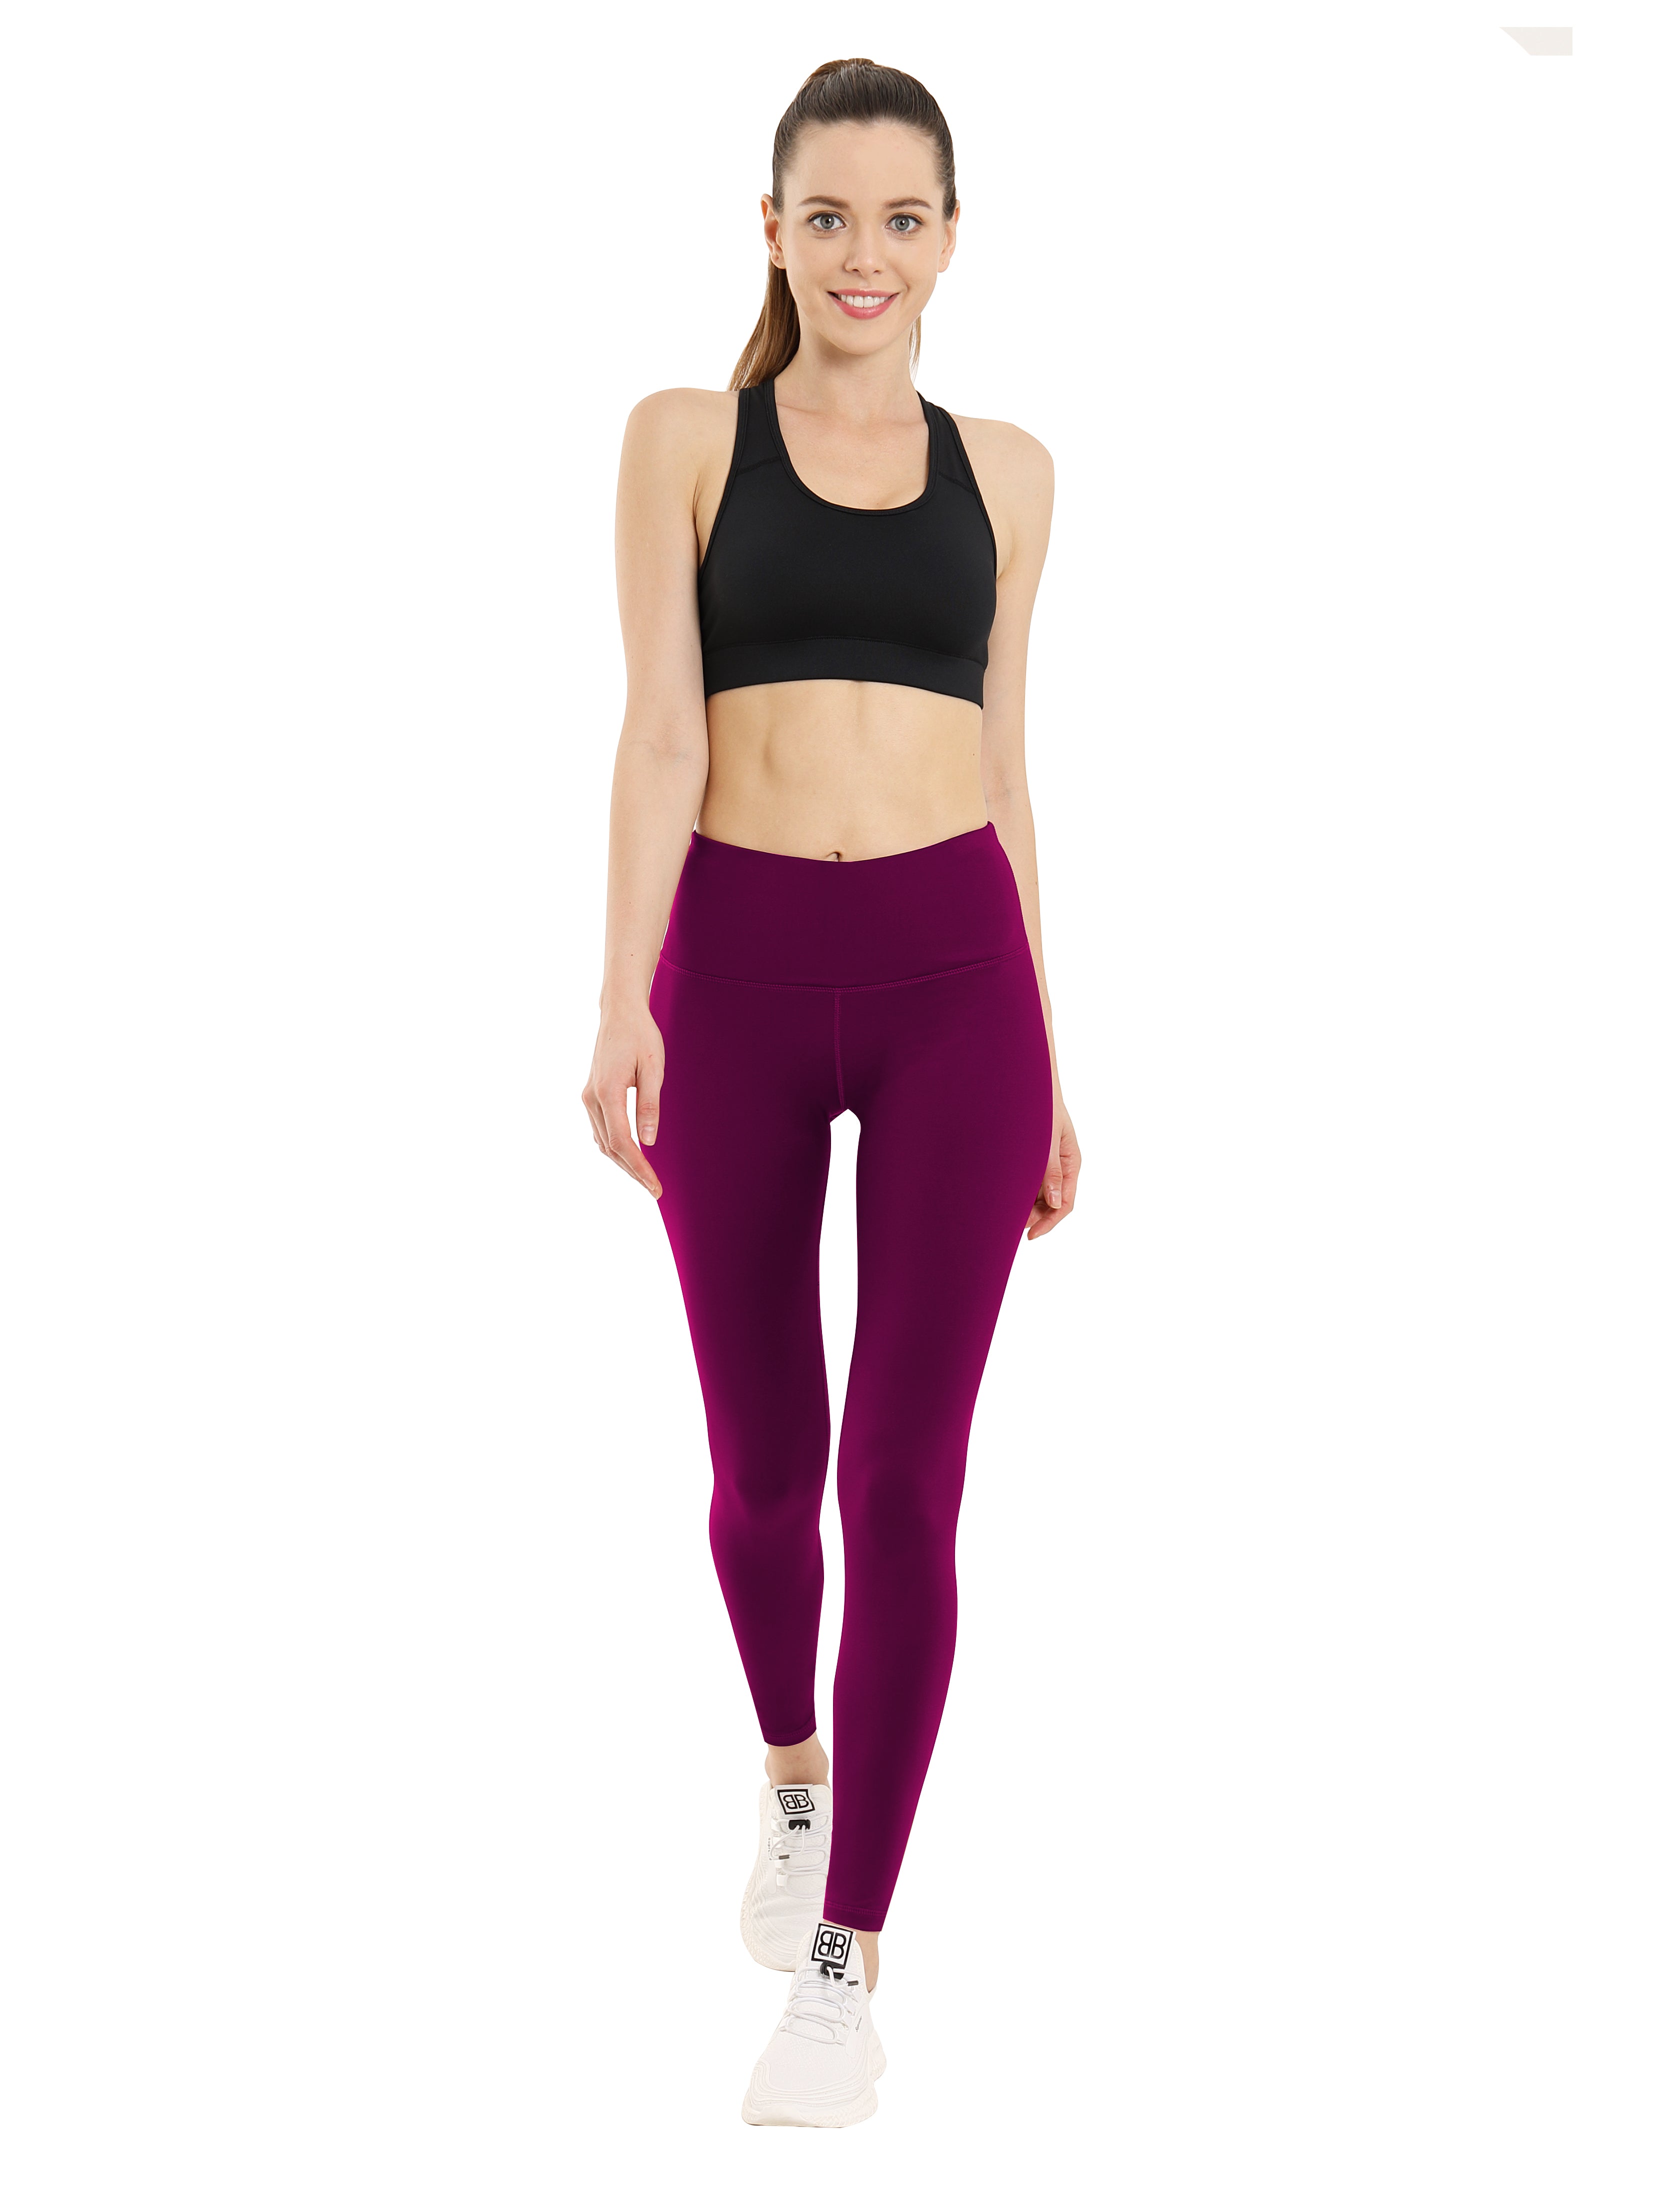 Buy BUBBLELIME 28 Women's High Waist Stirrup Yoga Leggings Extra Long Soft  Tummy Control Over The Heel Workout Yoga Pants at